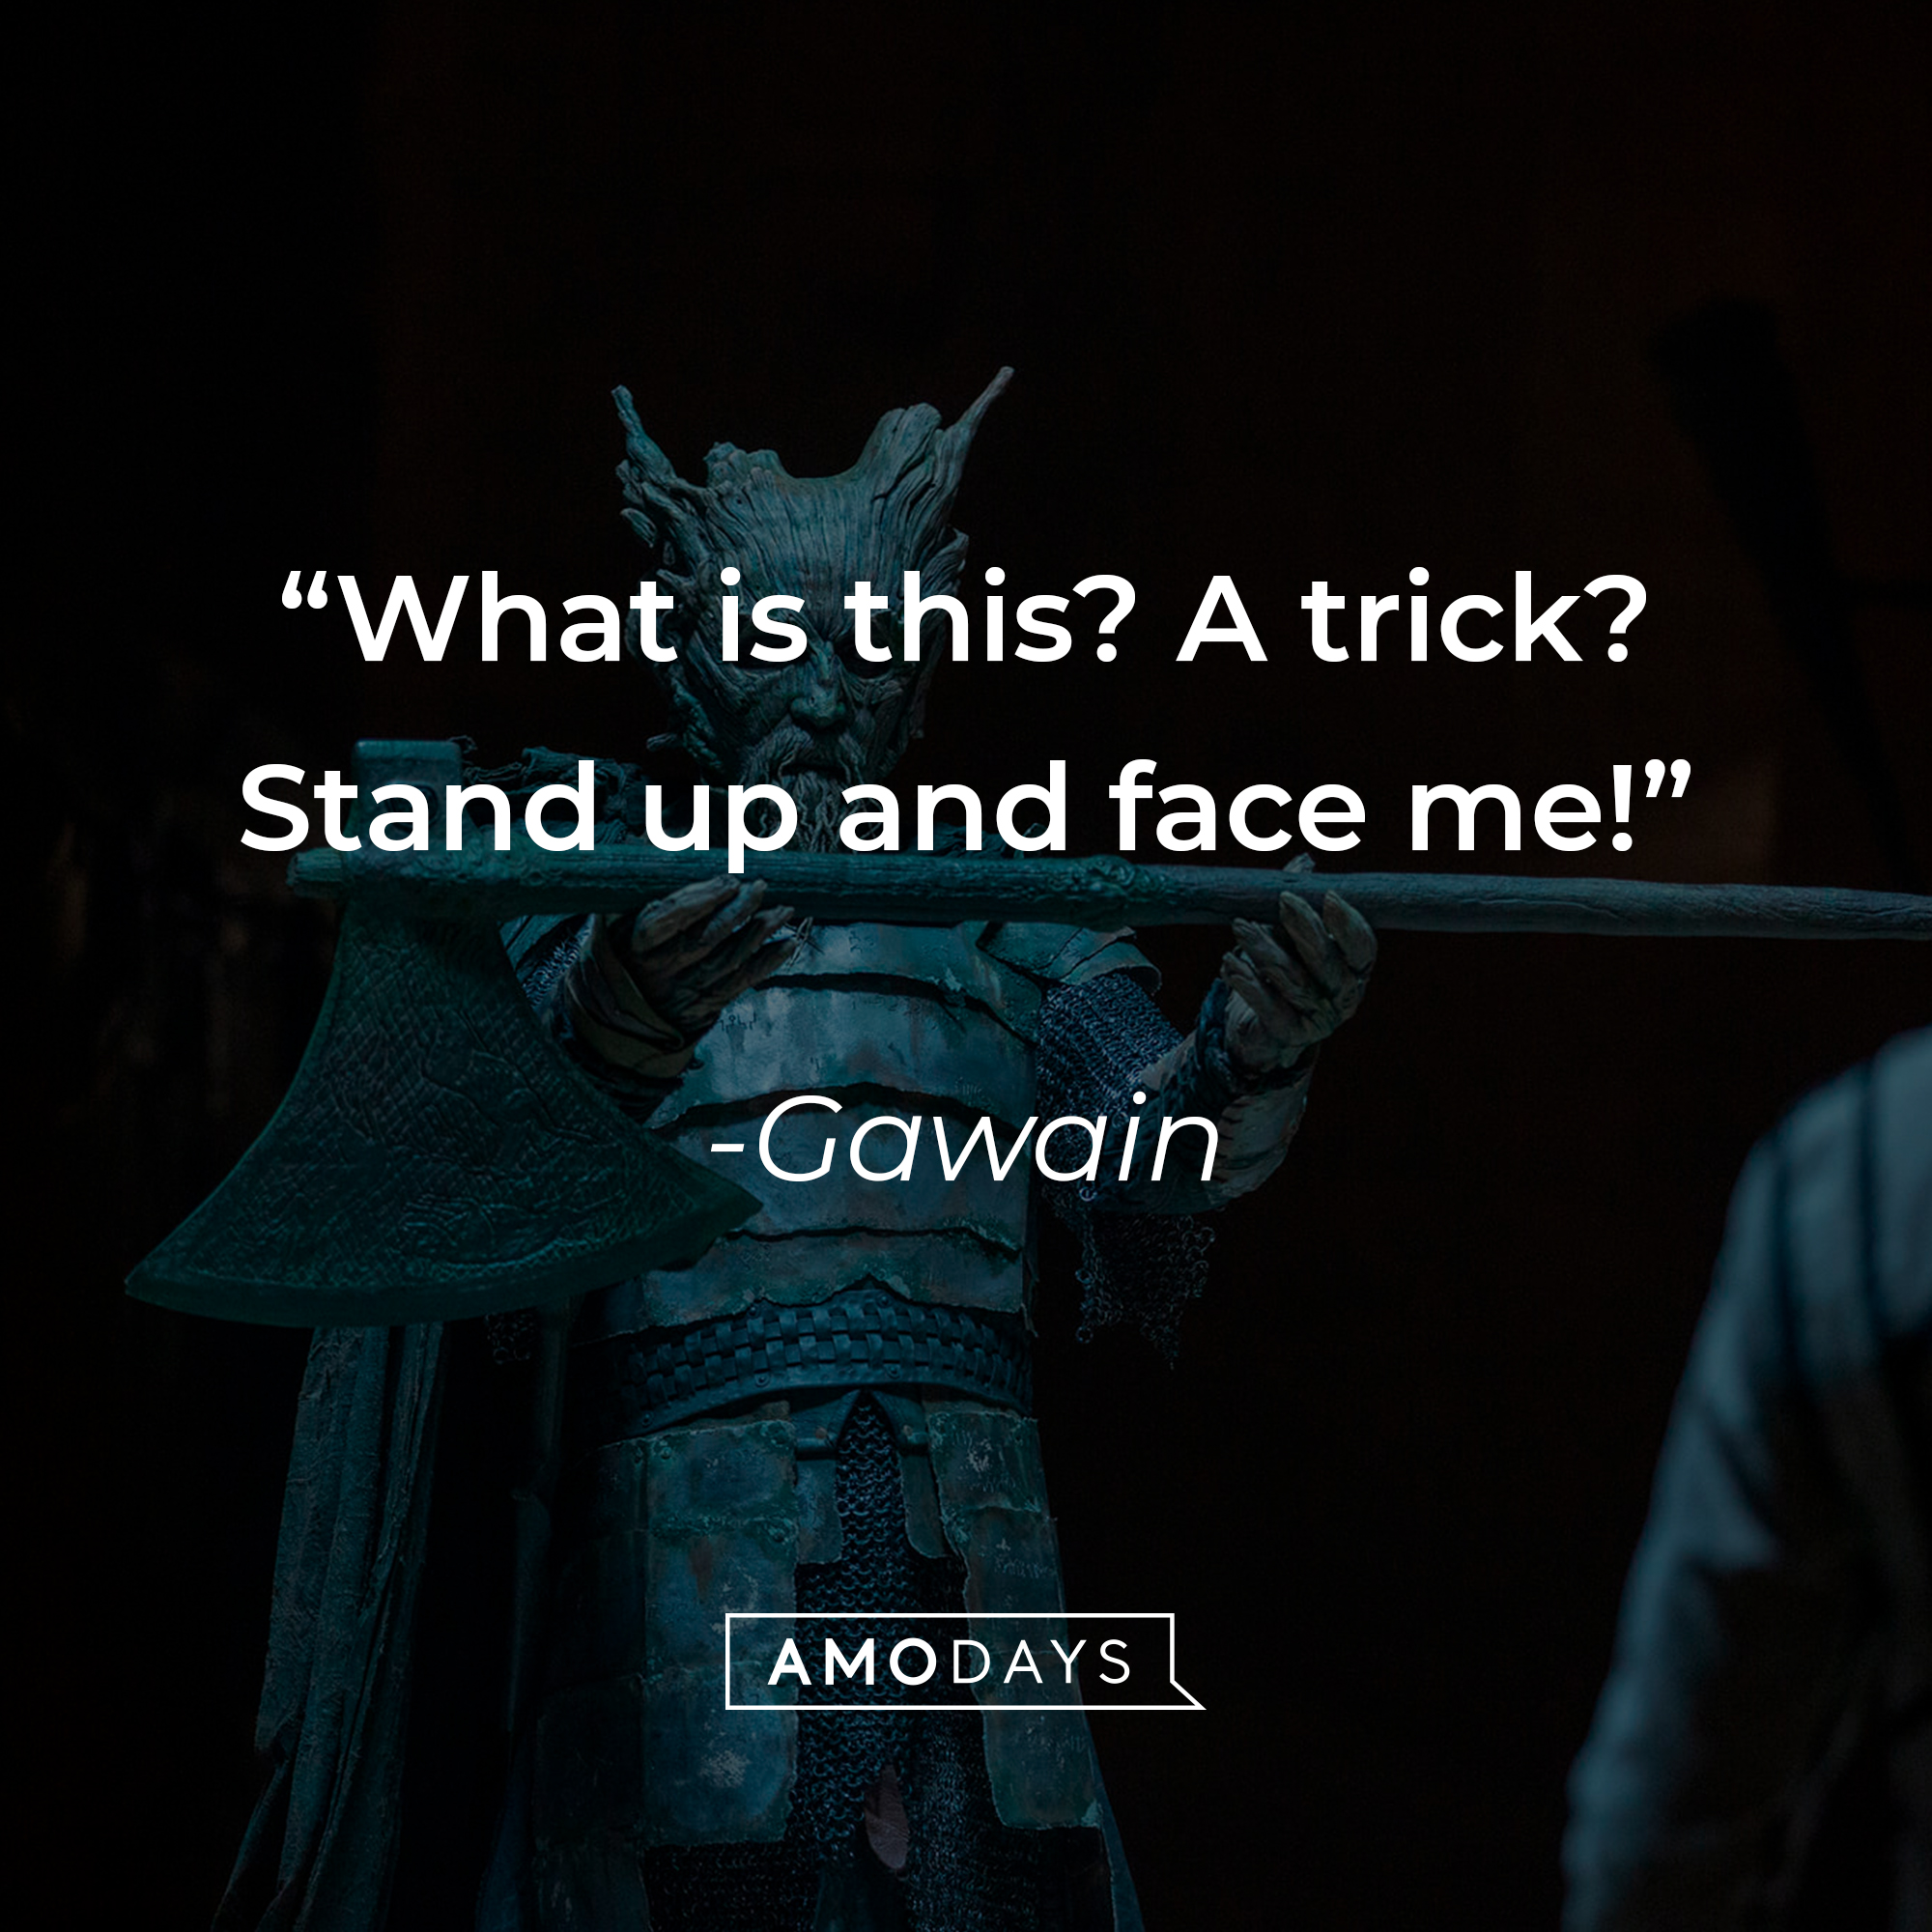 Gawain's quote: "What is this? A trick? Stand up and face me!" | Source: facebook.com/TheGreenKnight